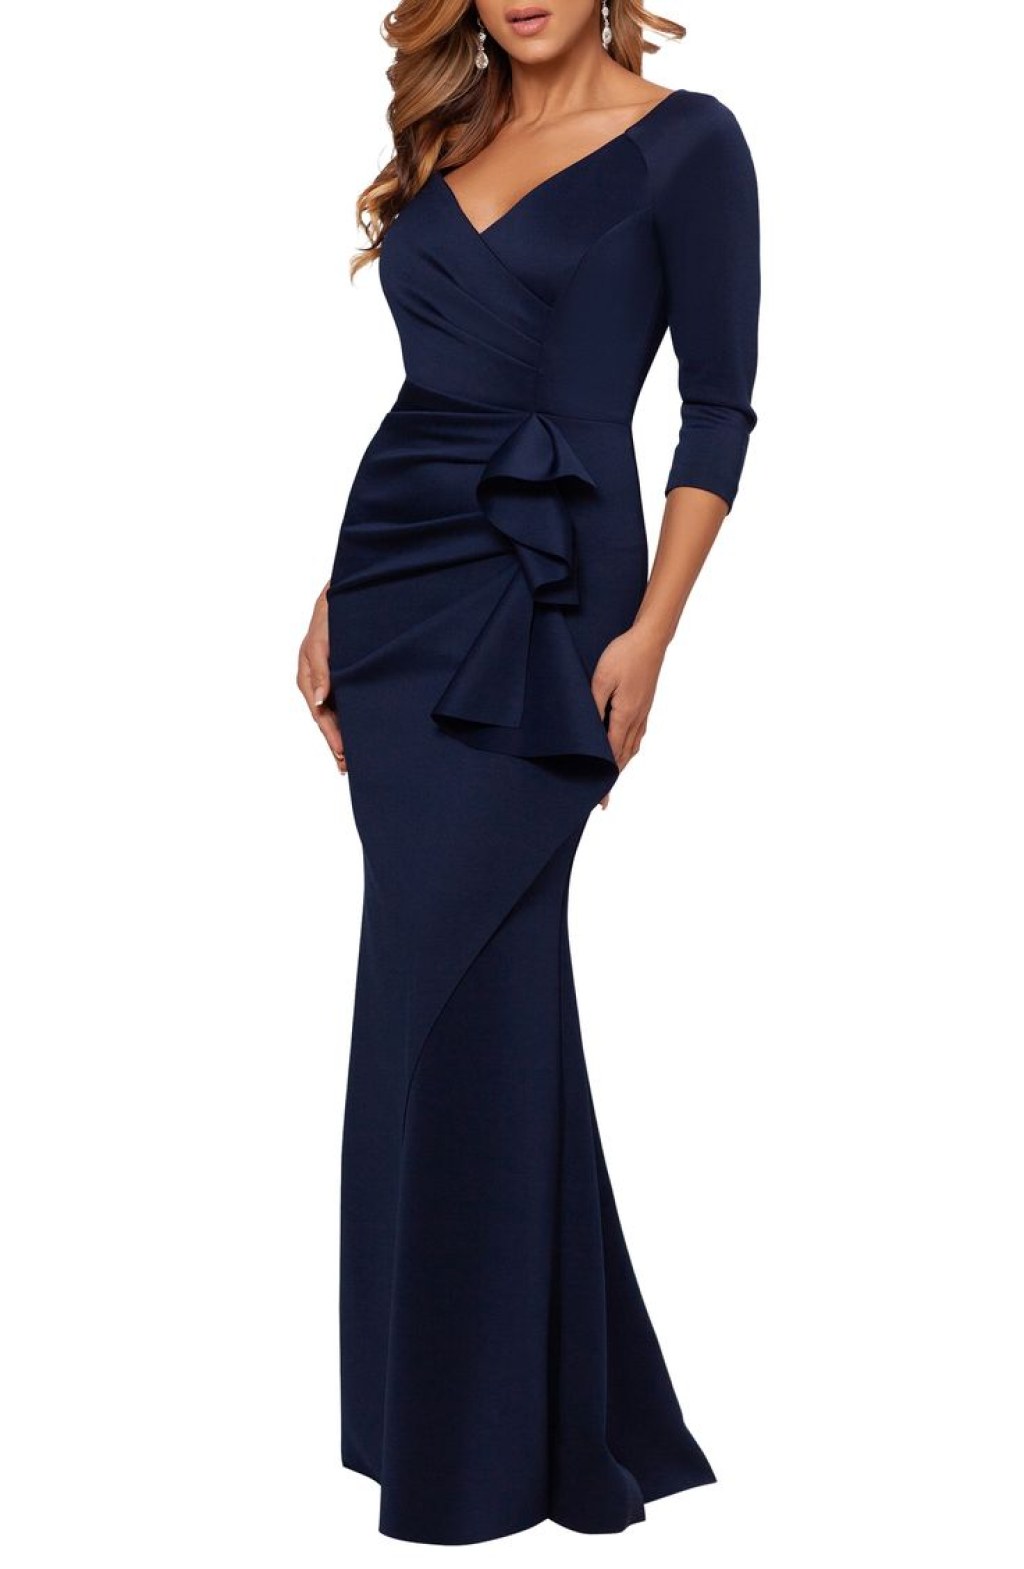 Picture of: Xscape Ruched Scuba Ruffle Gown  Nordstrom  Ruffled gown, Formal